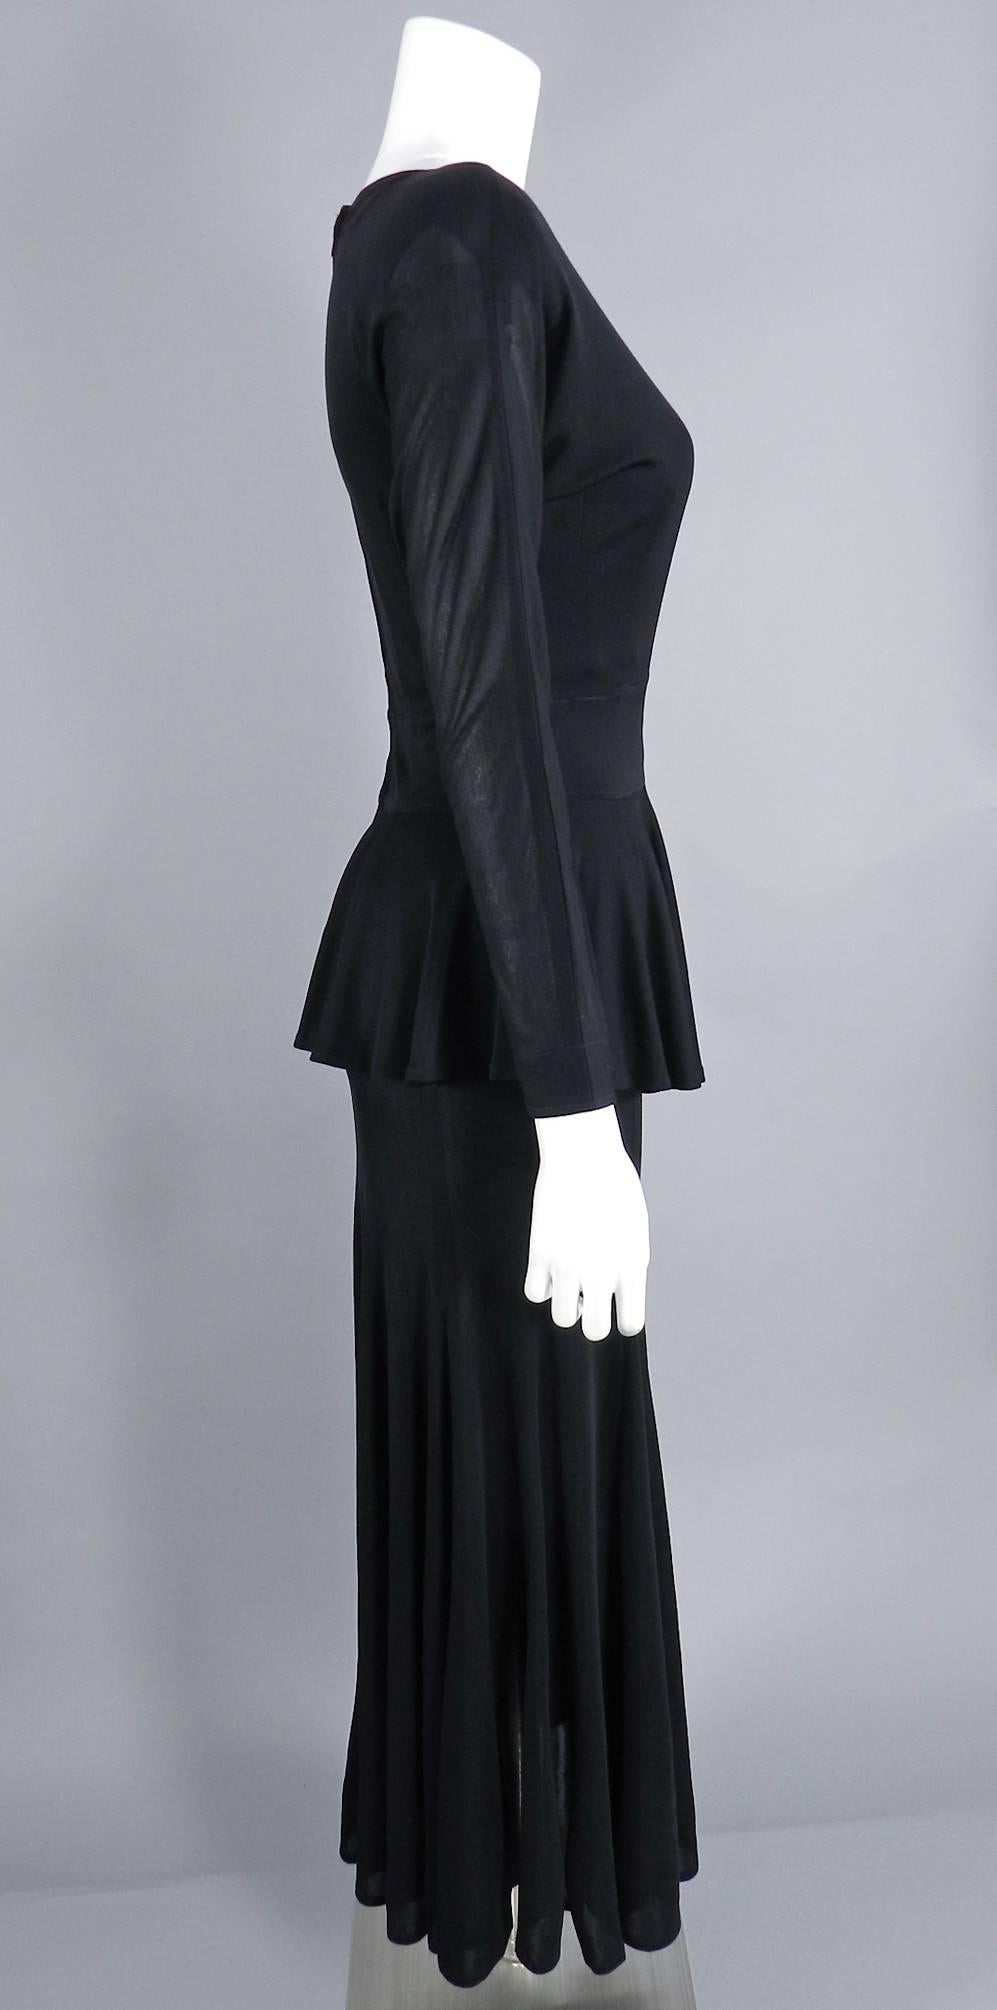 Jean Muir vintage circa early 1980's black rayon matte jersey dress. 1940's inspired peplum design, dolman sleeves, light shoulder pads, centre back zipper. Tagged size USA 8. Garment bust measures about 36